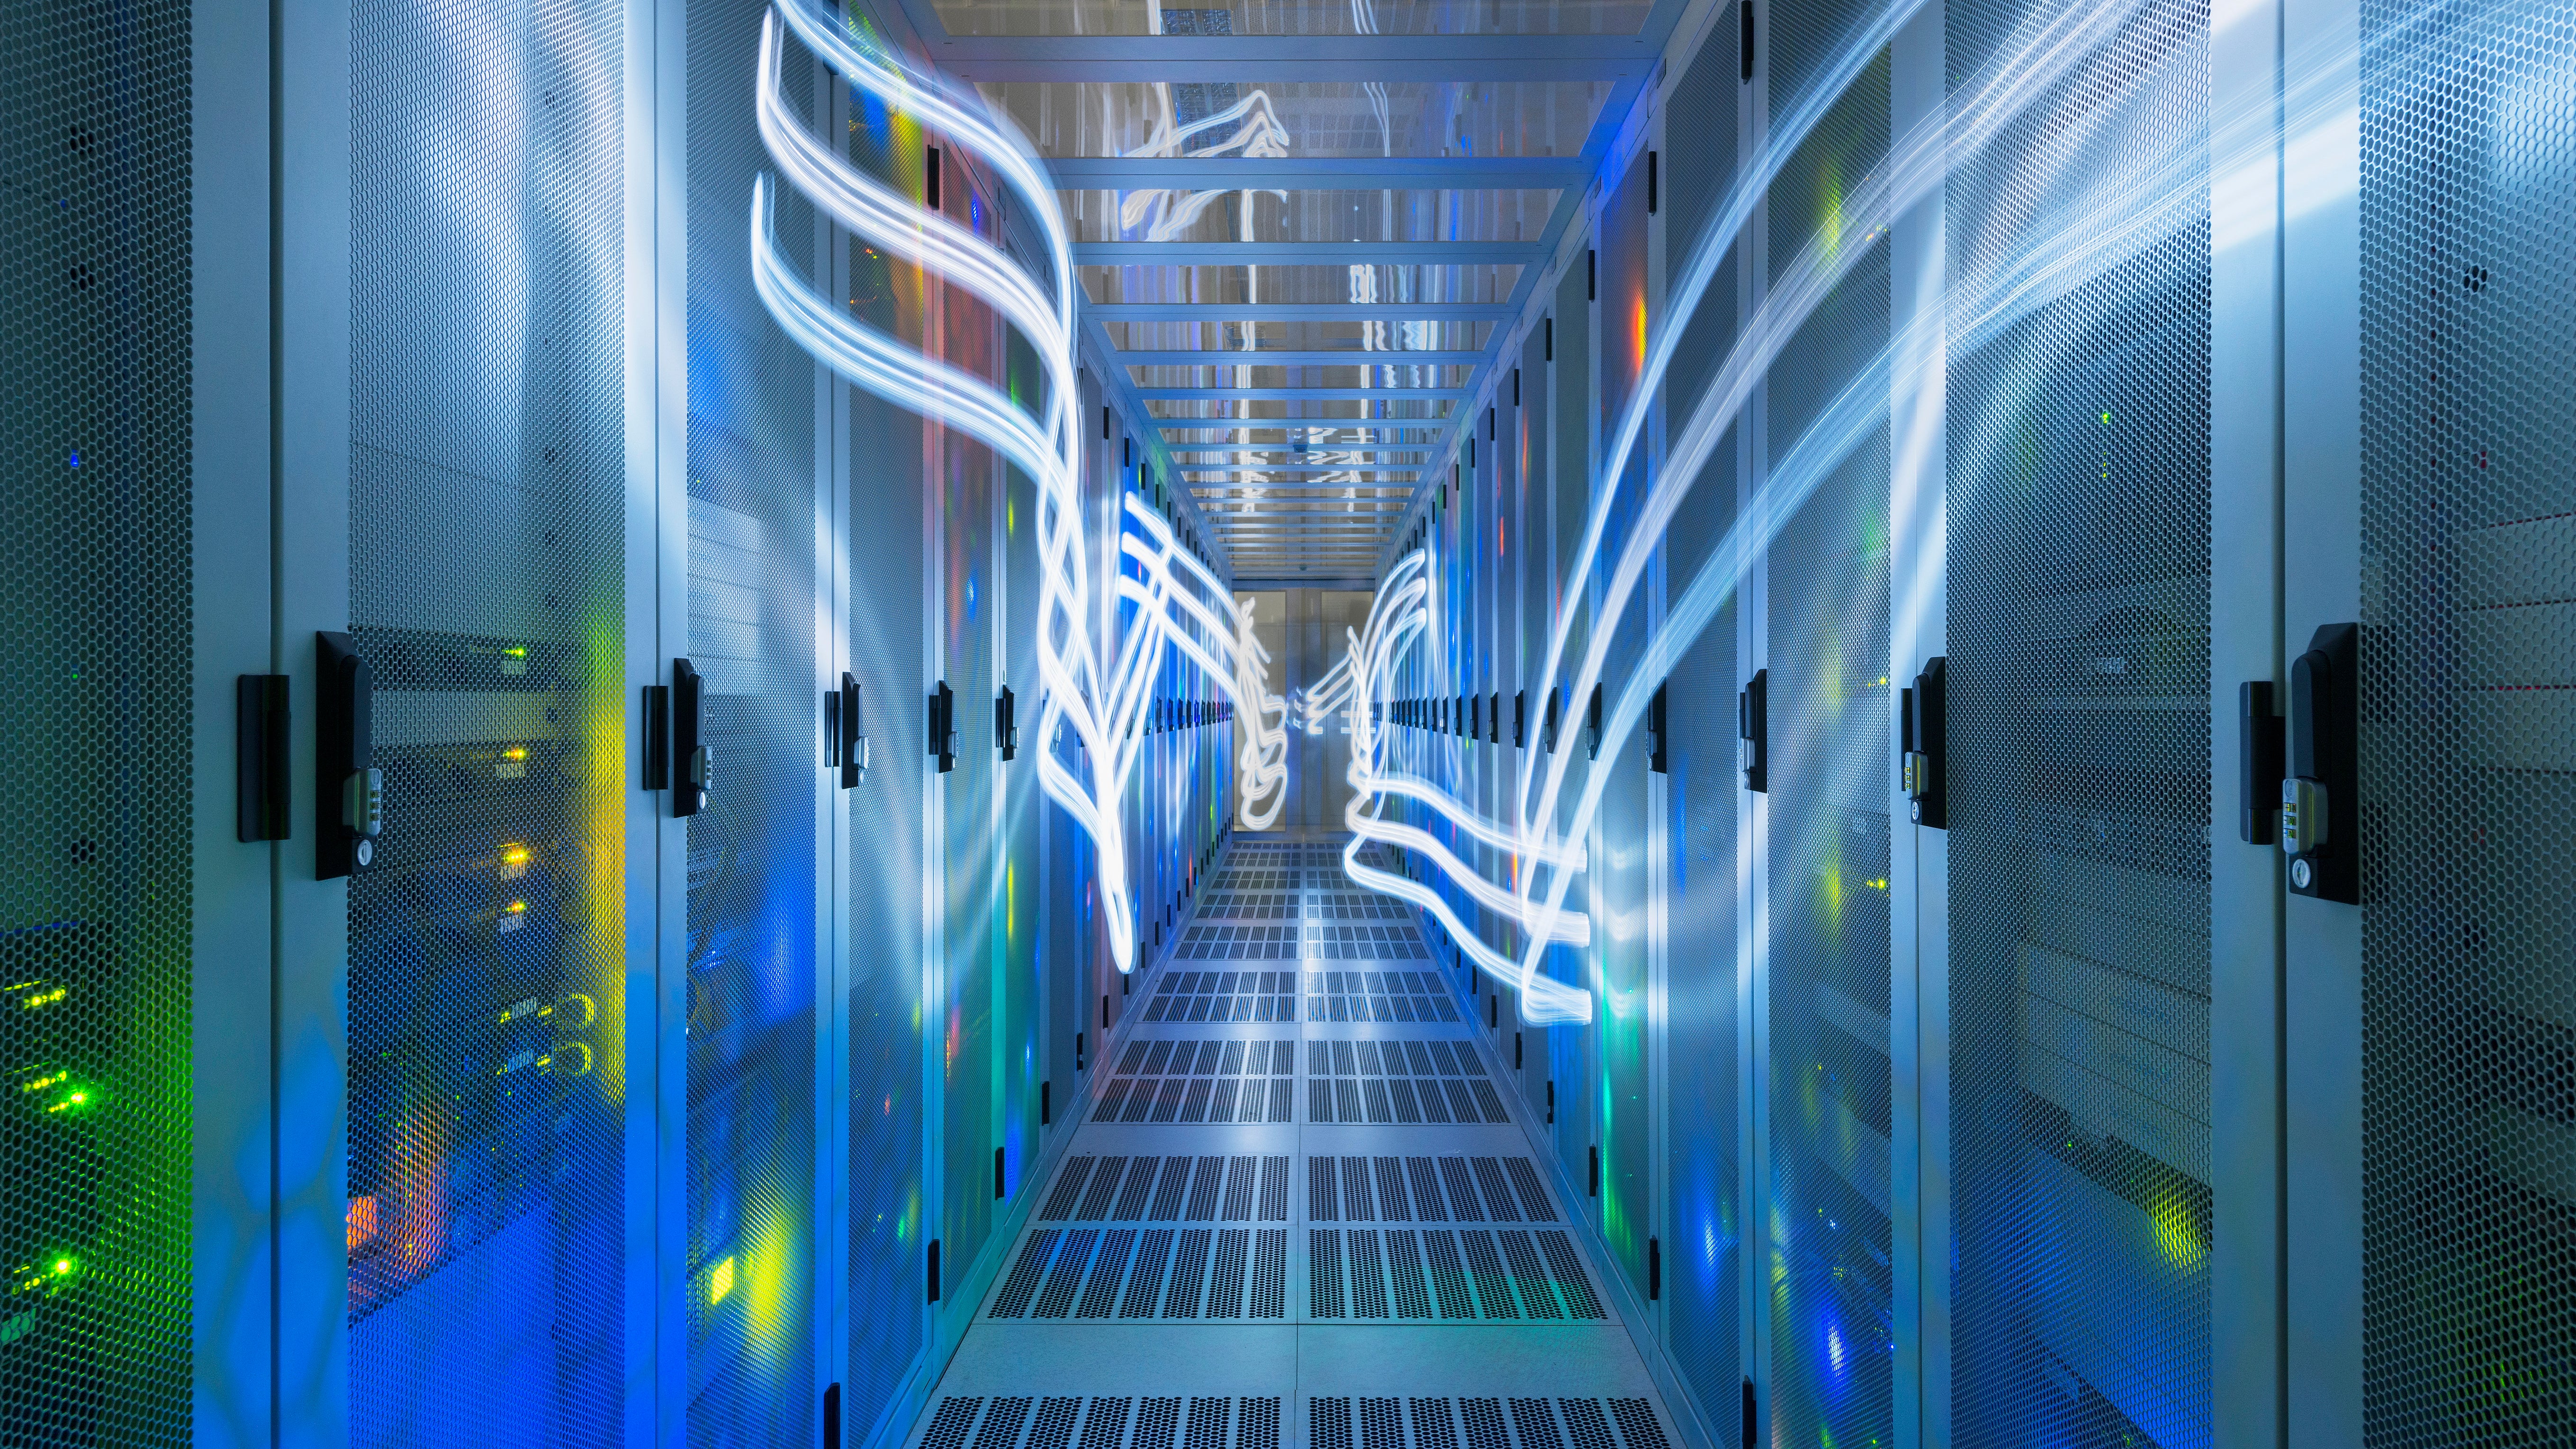 Commercial server room, showing an overlay of data storage